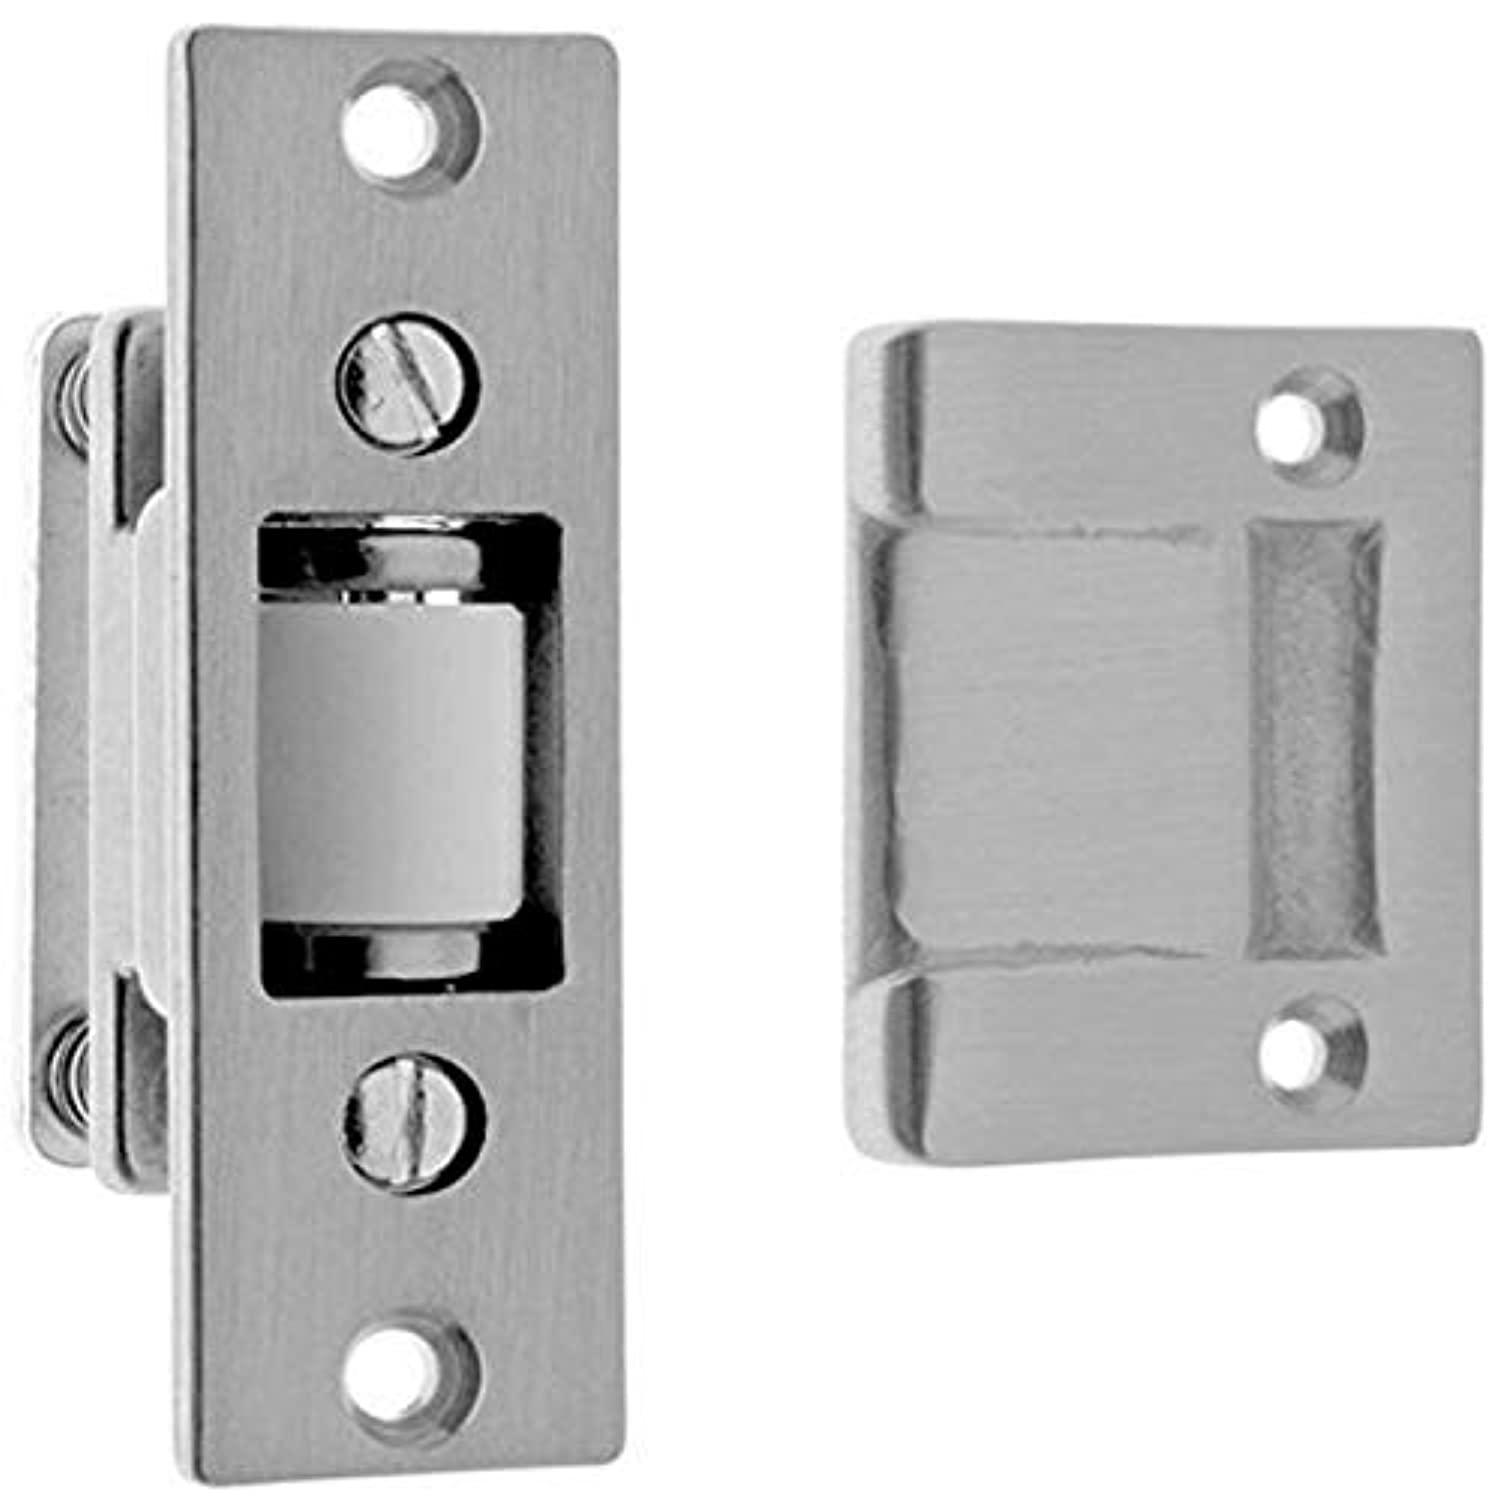 idhba idh by st. simons 12017-26d premium quality solid brass heavy duty silent roller latch with adjustable square strike, s